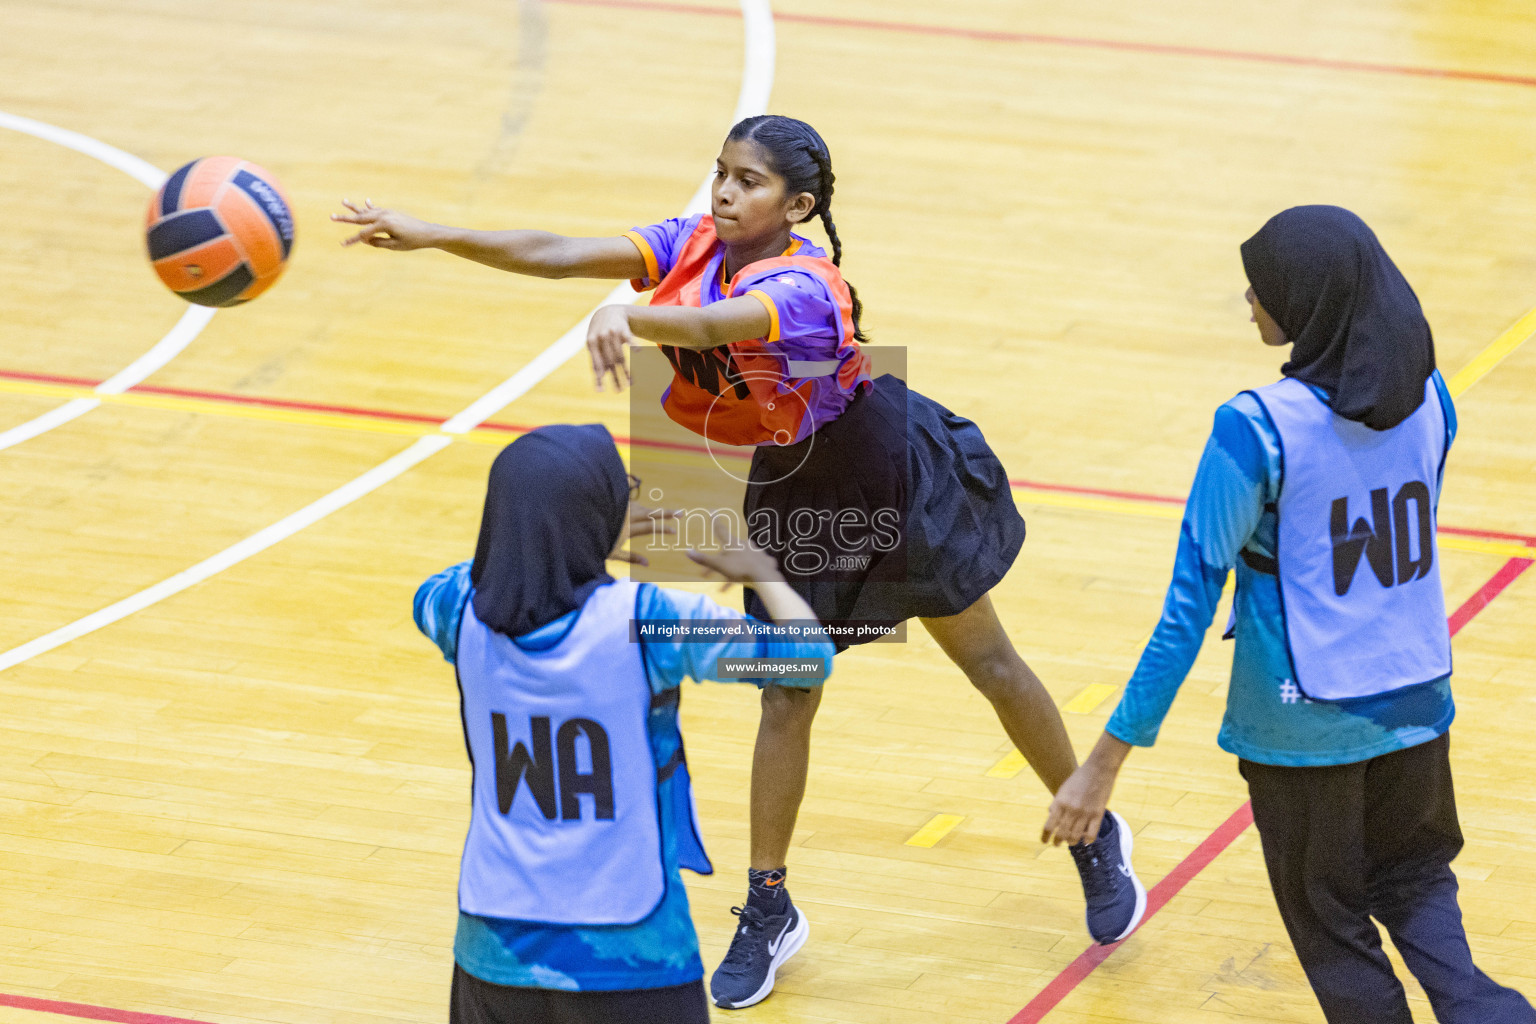 Day 10 of 24th Interschool Netball Tournament 2023 was held in Social Center, Male', Maldives on 5th November 2023. Photos: Nausham Waheed / images.mv